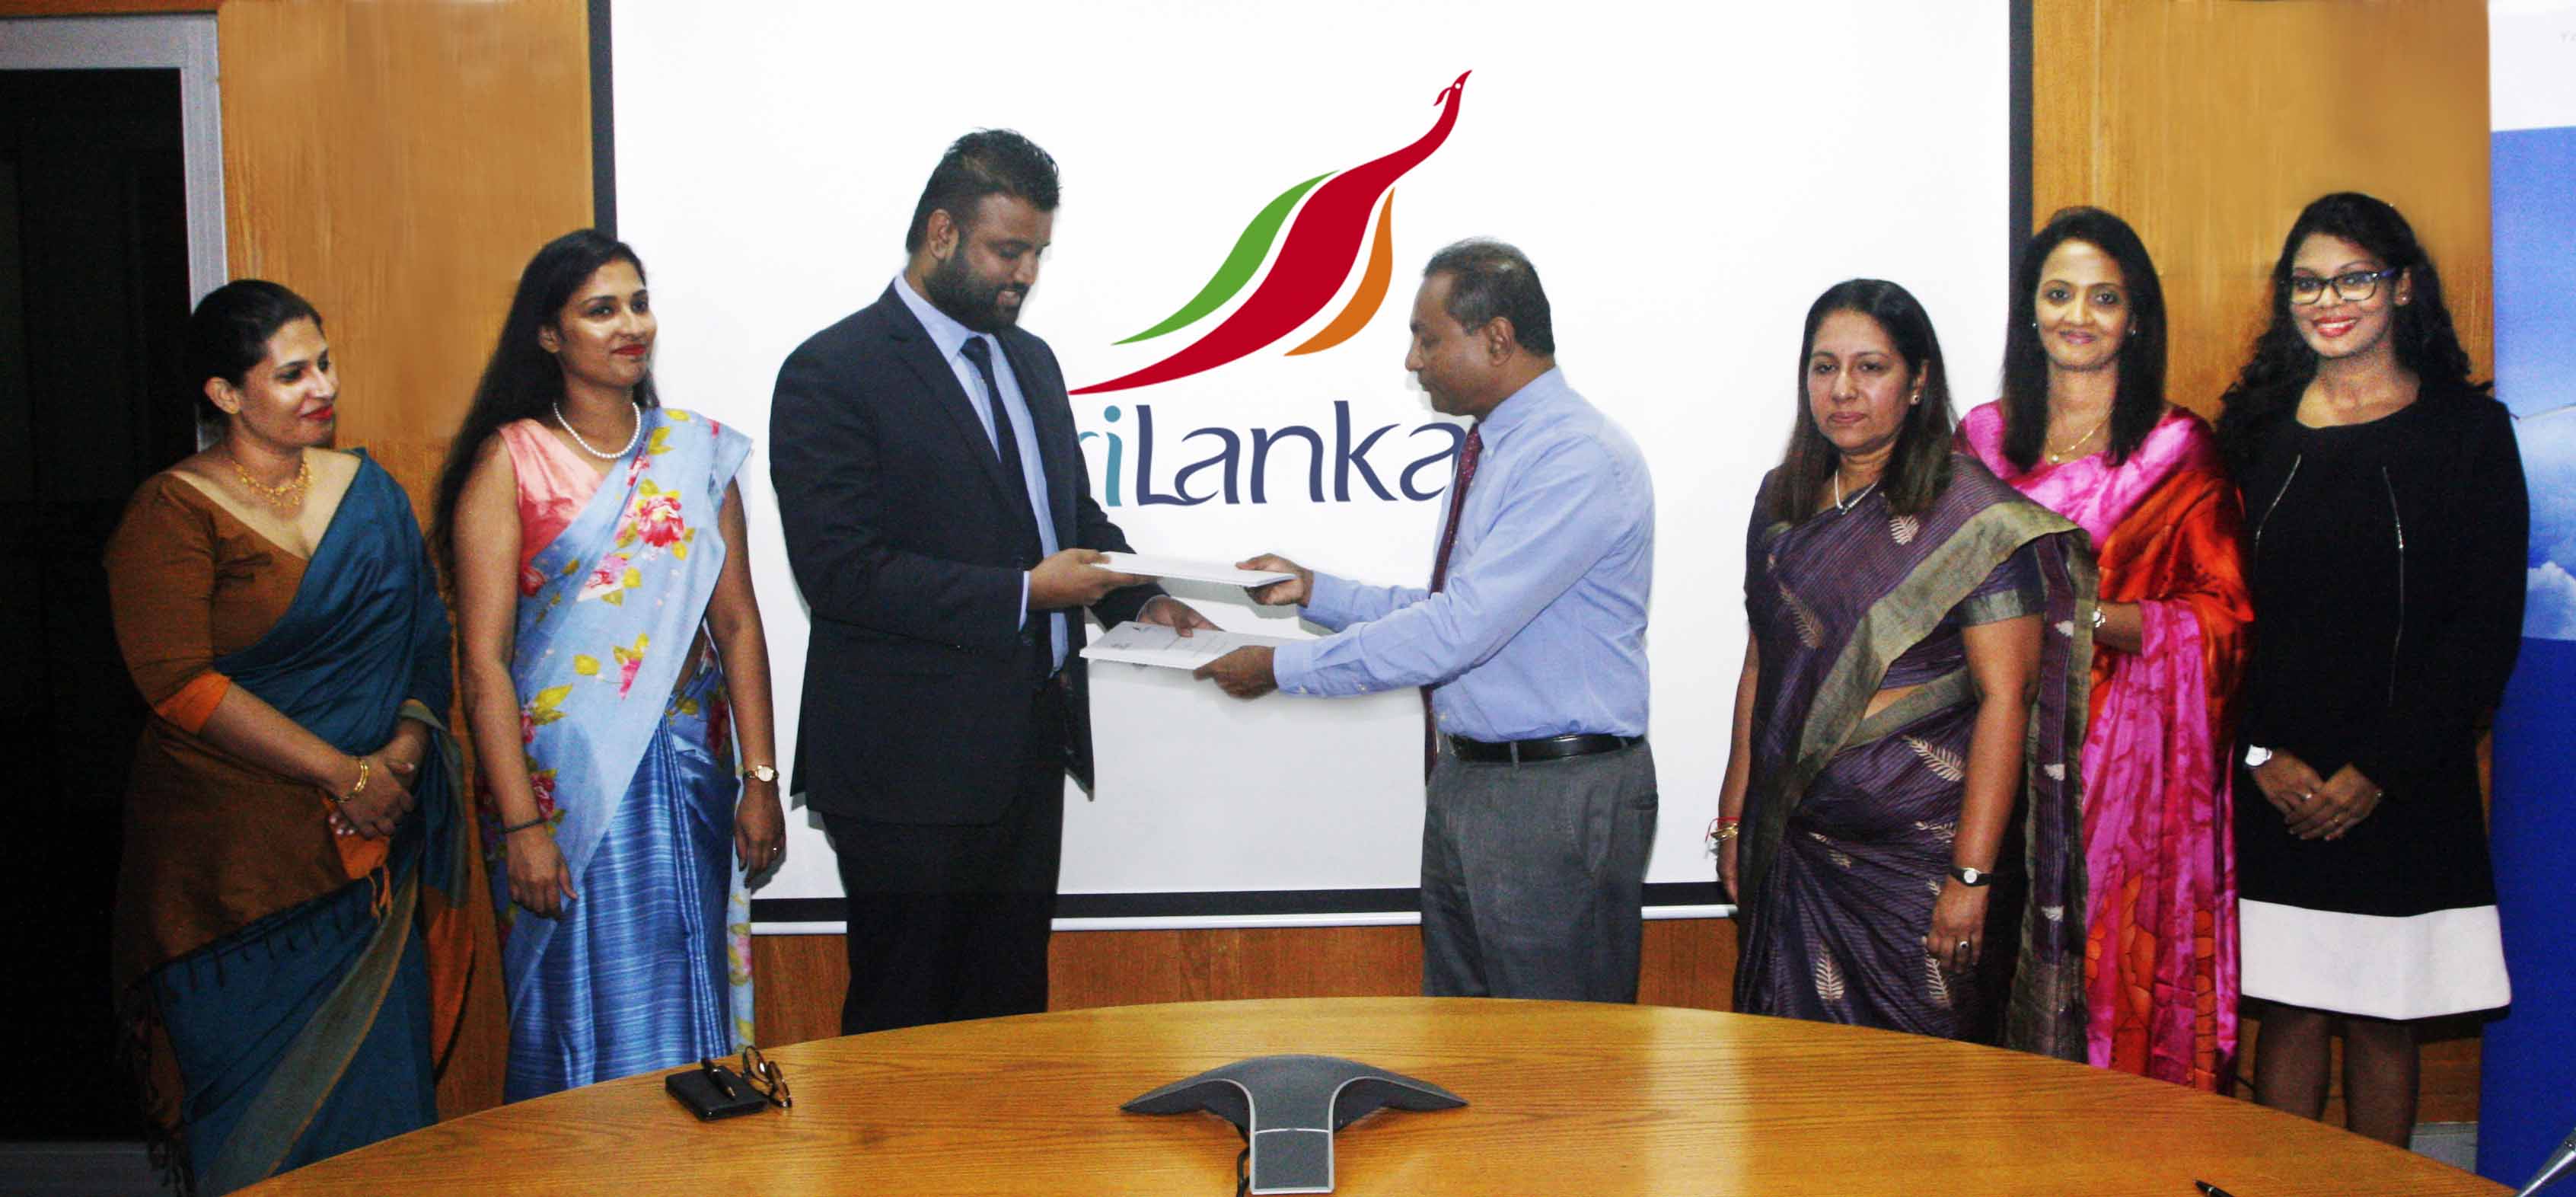 Chairman, Colombo Institute of Research and Psychology Dr. Darshan Perera exchanging MOU documents with the Head of Human Resources, Sri Lankan Airlines Pradeepa Kekulawala (center)